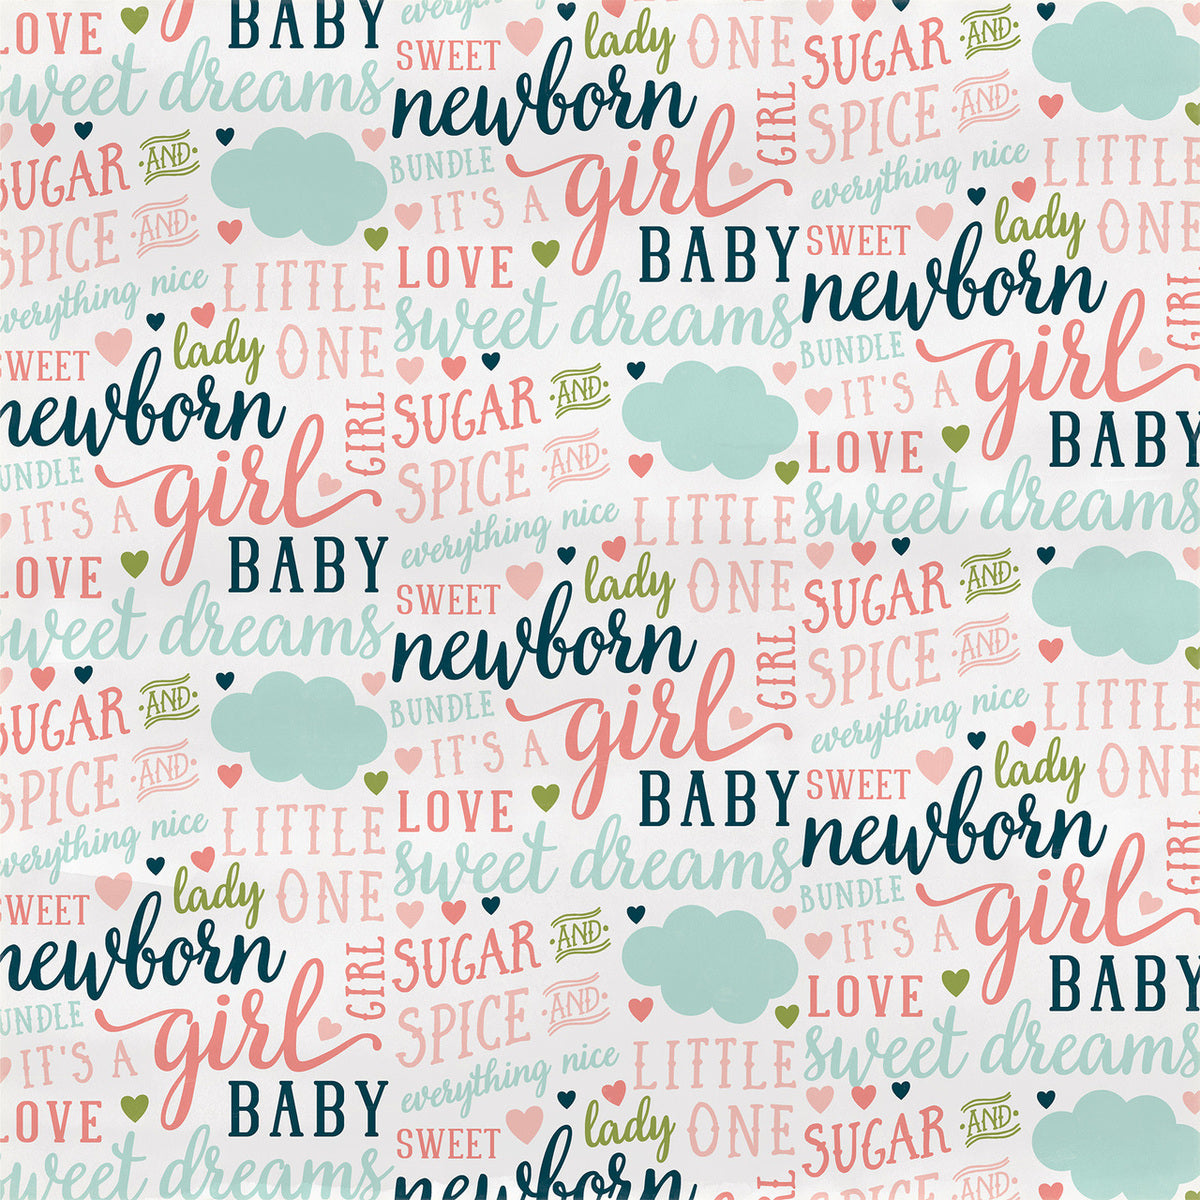 12x12 cardstock with baby girl words and phrases